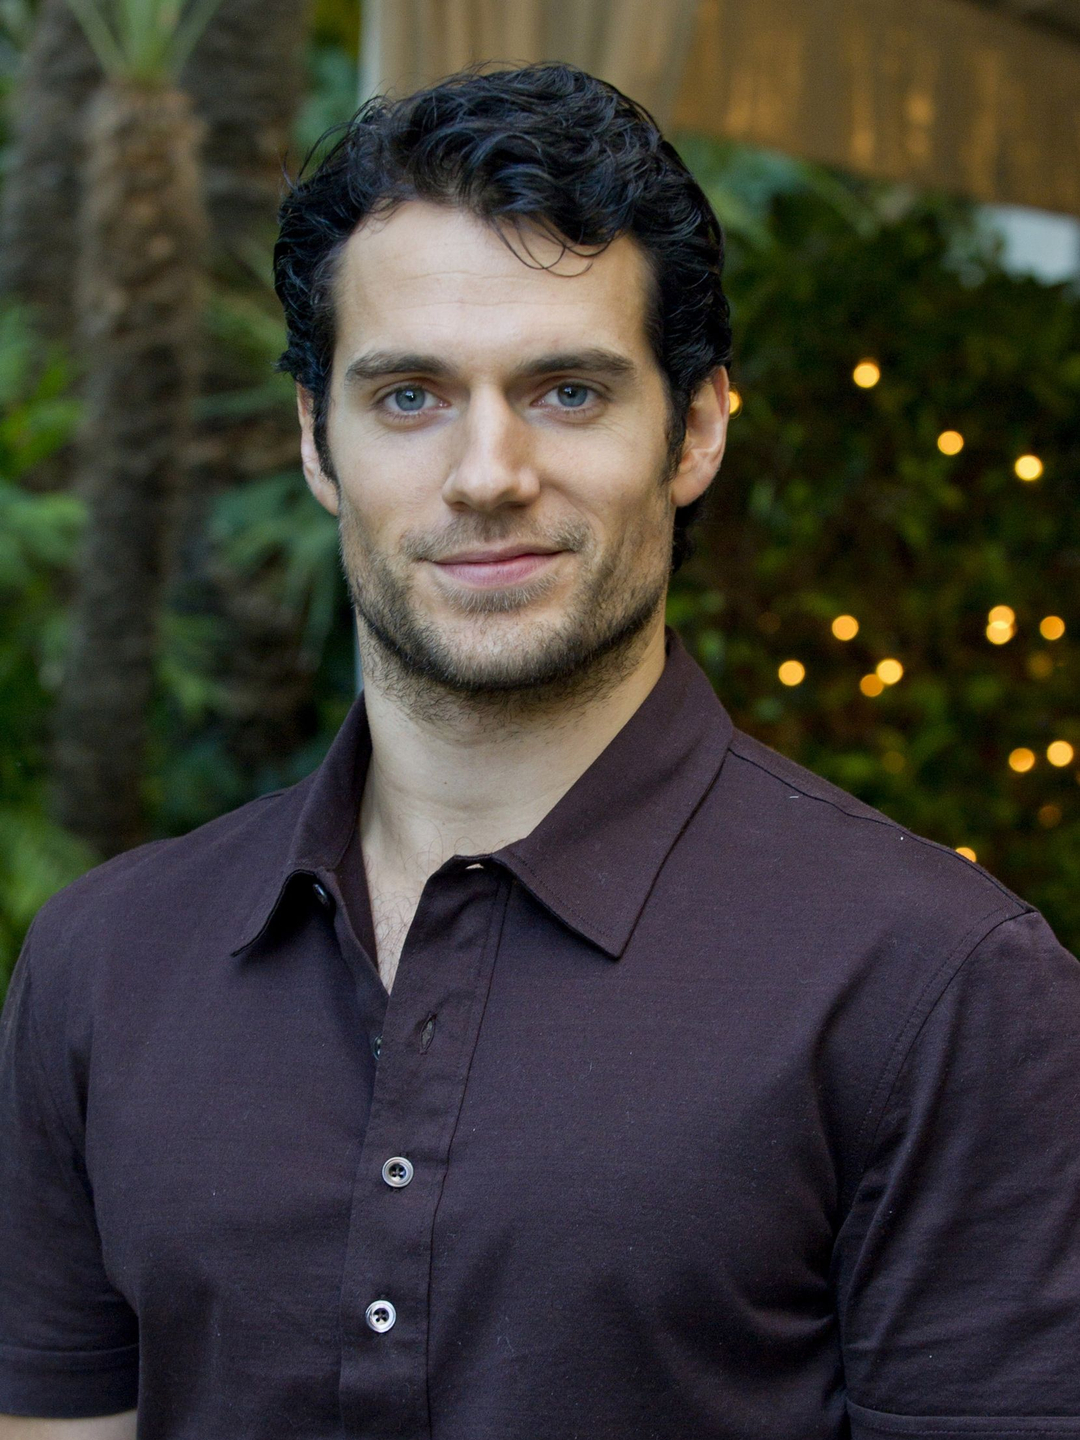 Henry Cavill early childhood